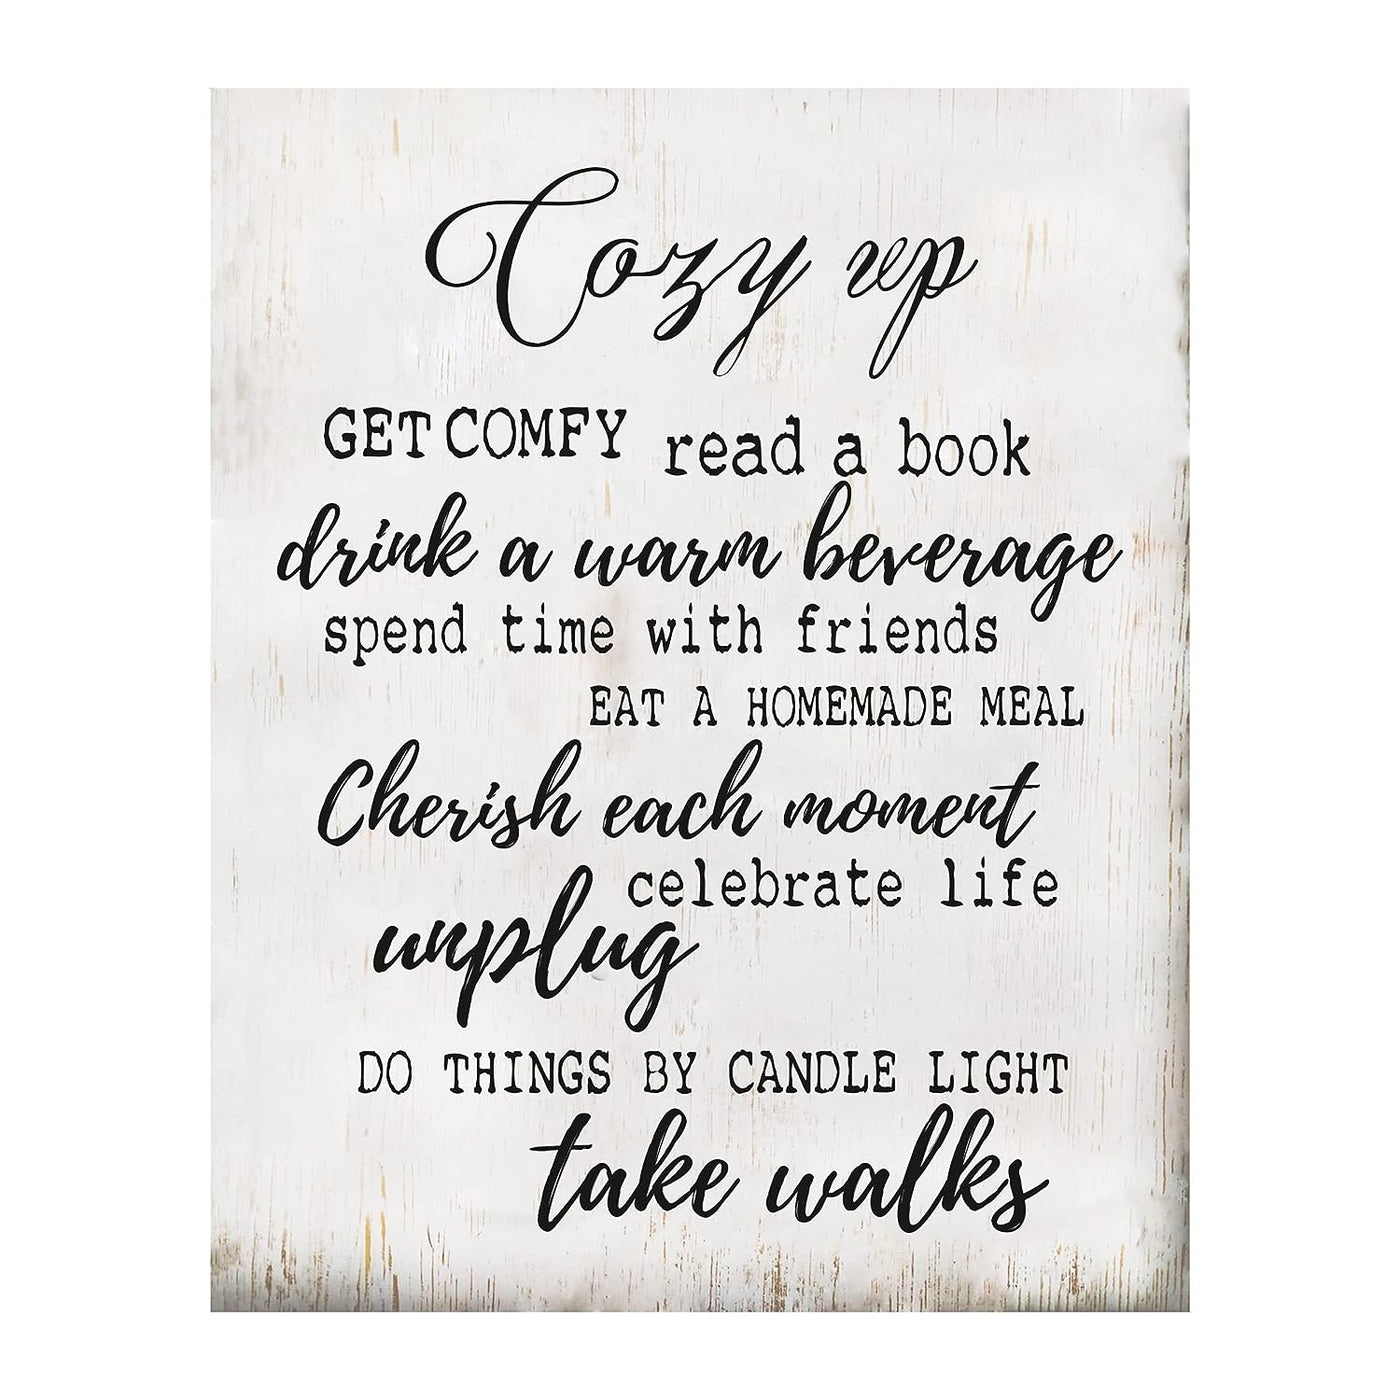 Relaxin' Rules- Rustic Wall Art- 8 x 10" Wall Print Decor-Ready to Frame. Distressed Sign Print Perfect For Beach, Lake, Cabin or Lodge Wall Decor. Great Reminders to Relax, Unplug & Celebrate Life!